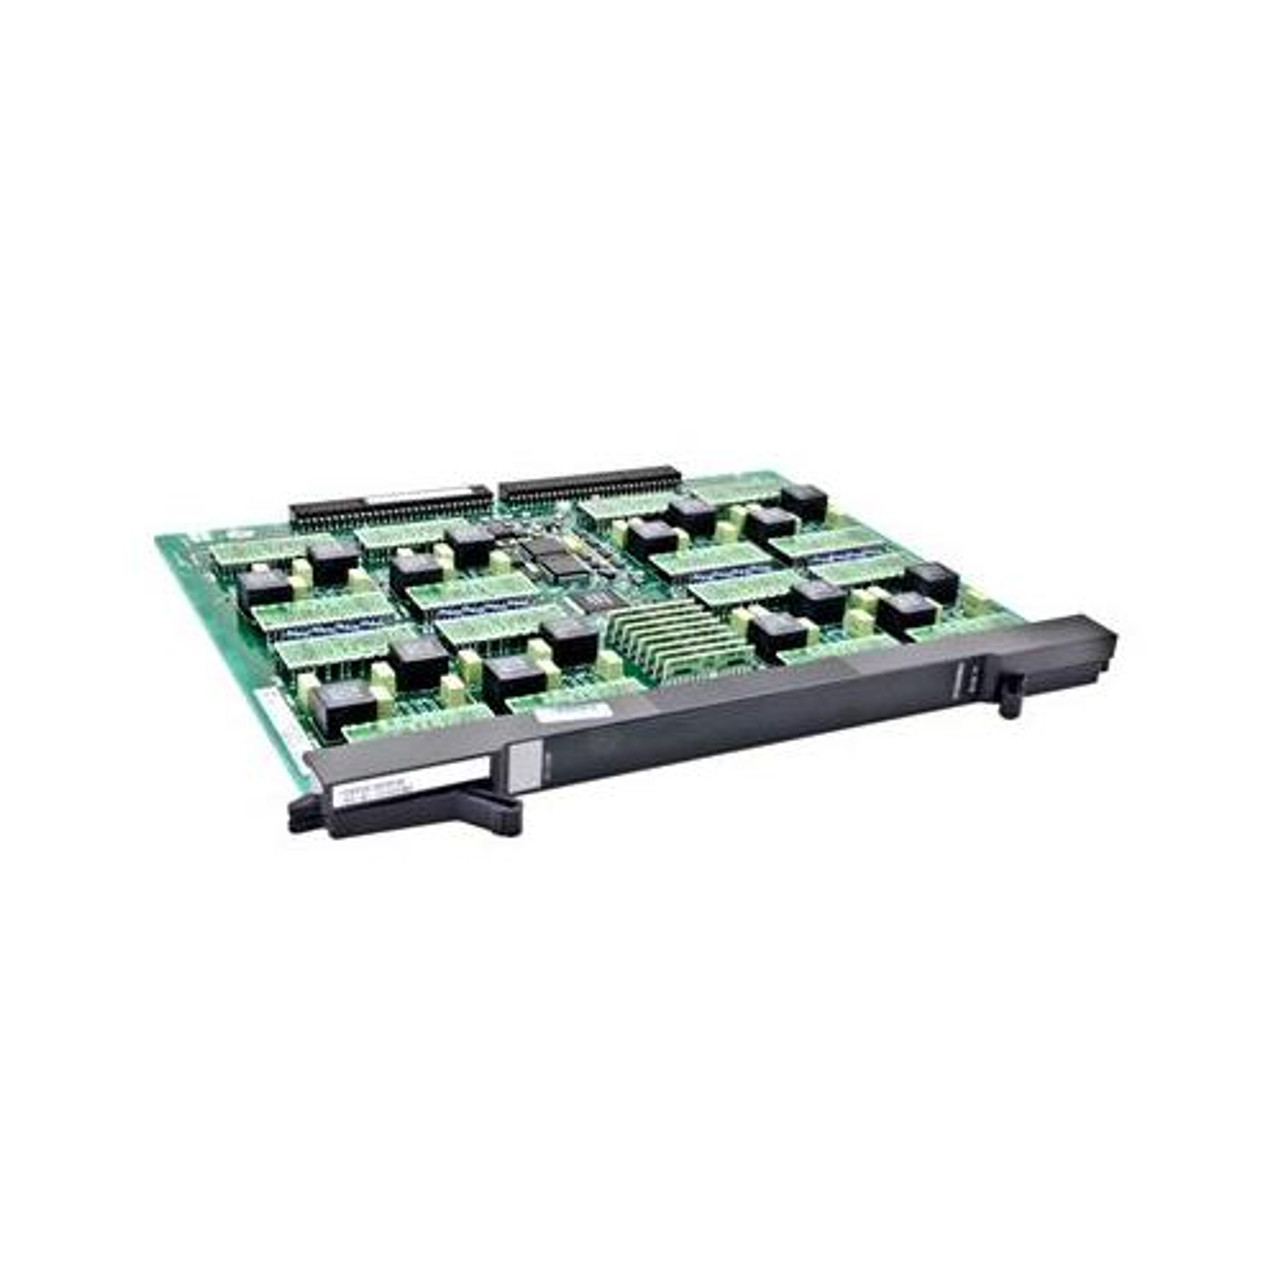 EM316NM MRV Fibre Driver Snmp Management Module With 1 10base-t Port And An Rs232 Interfac